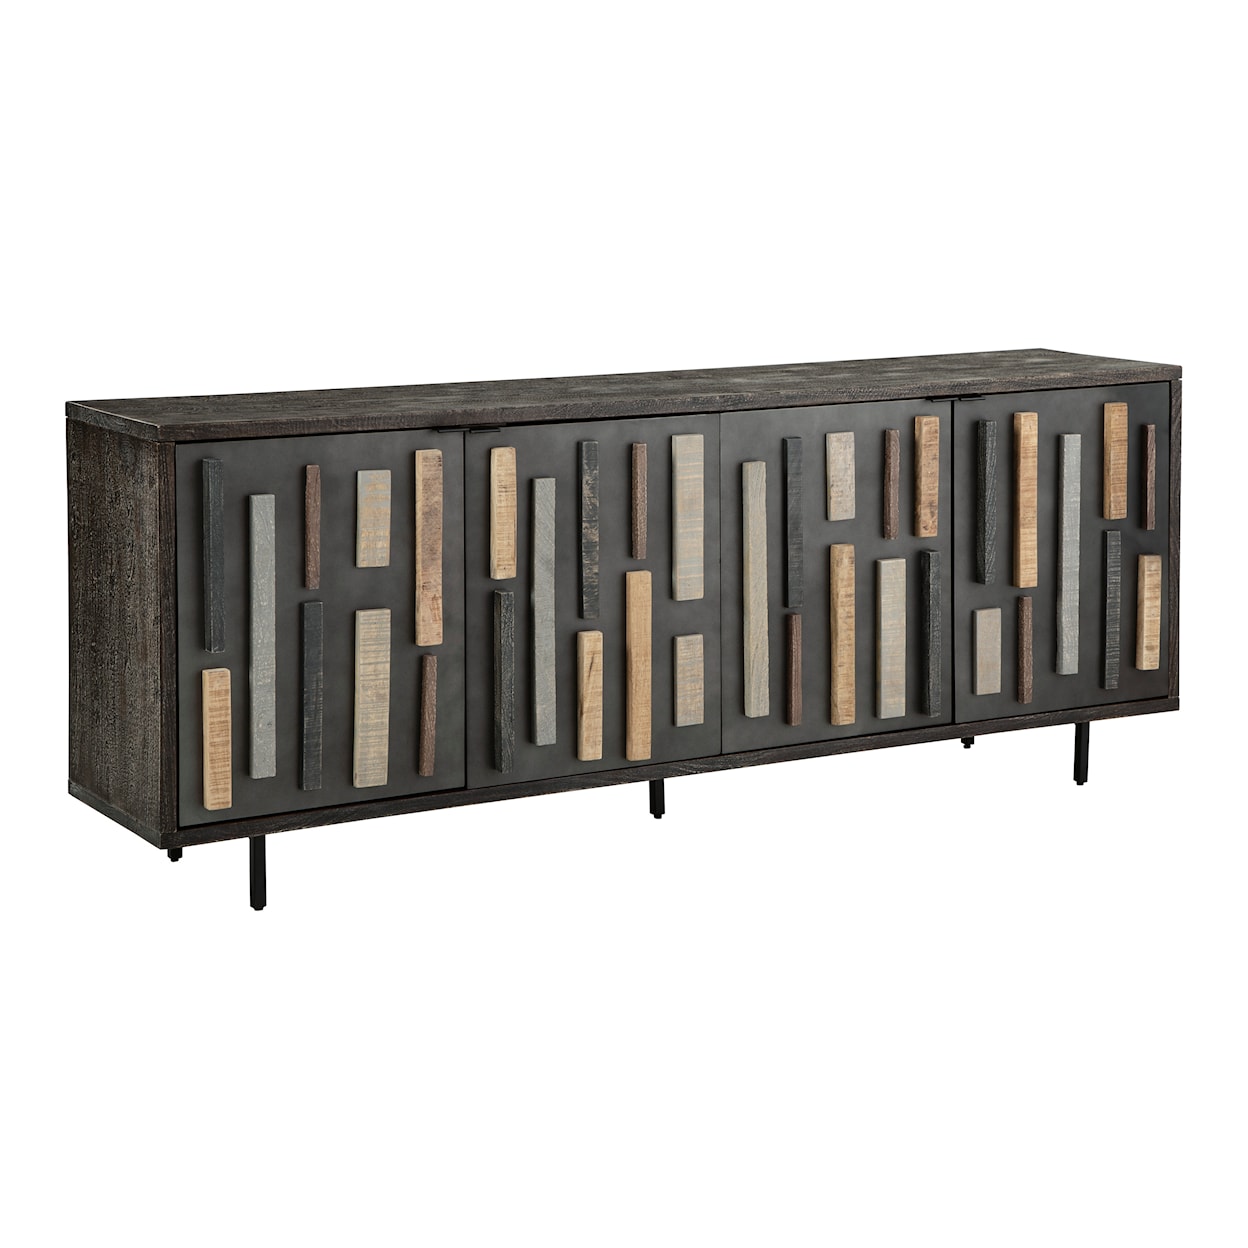 Benchcraft Franchester Accent Cabinet